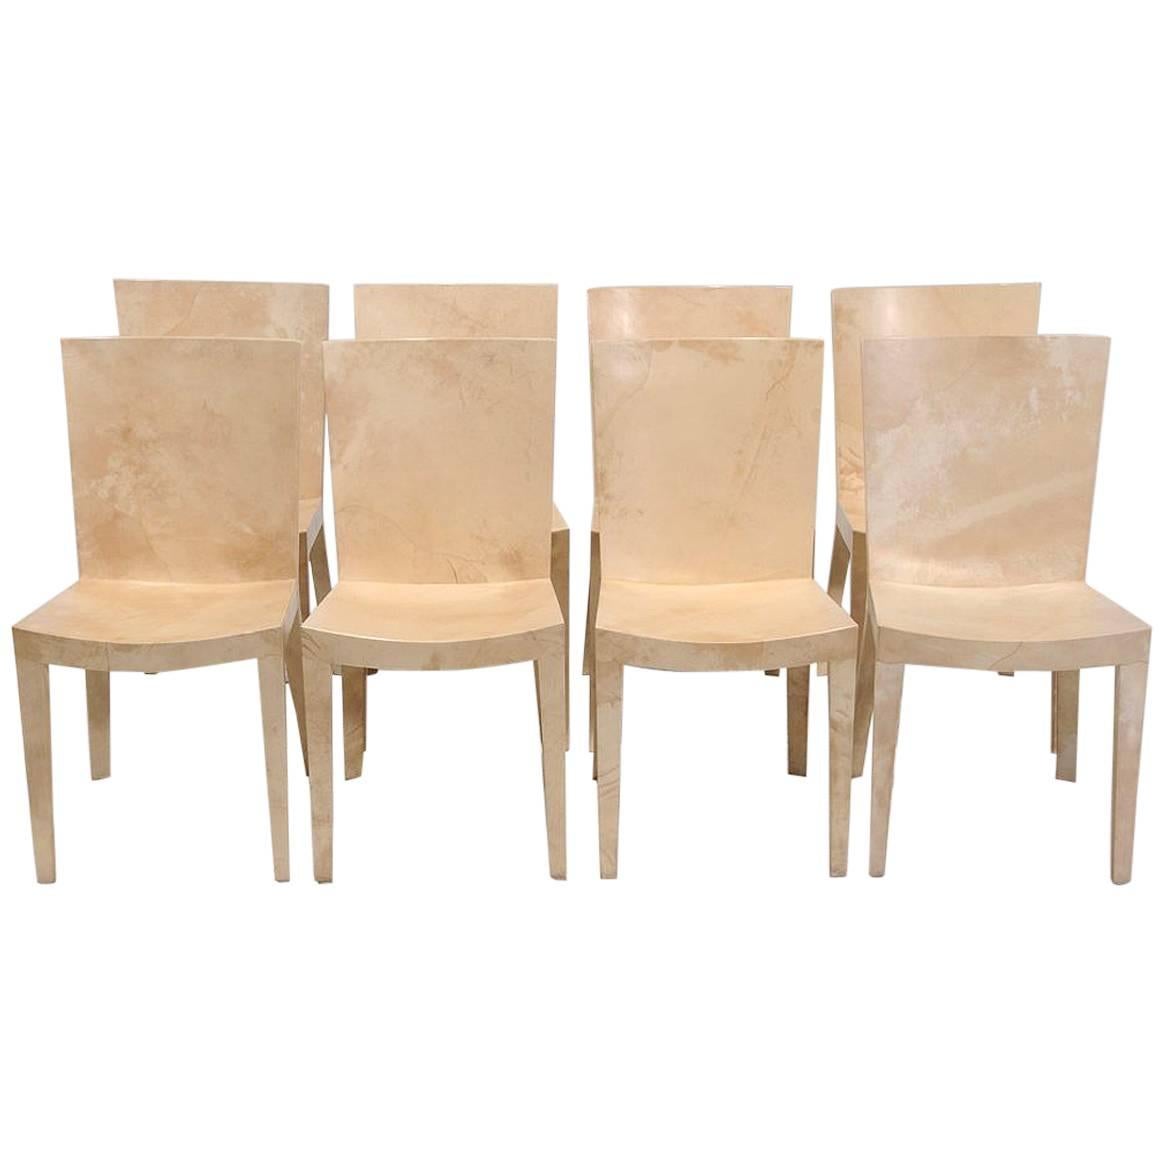 Set of JMF Lacquered Goatskin Chairs by Karl Springer